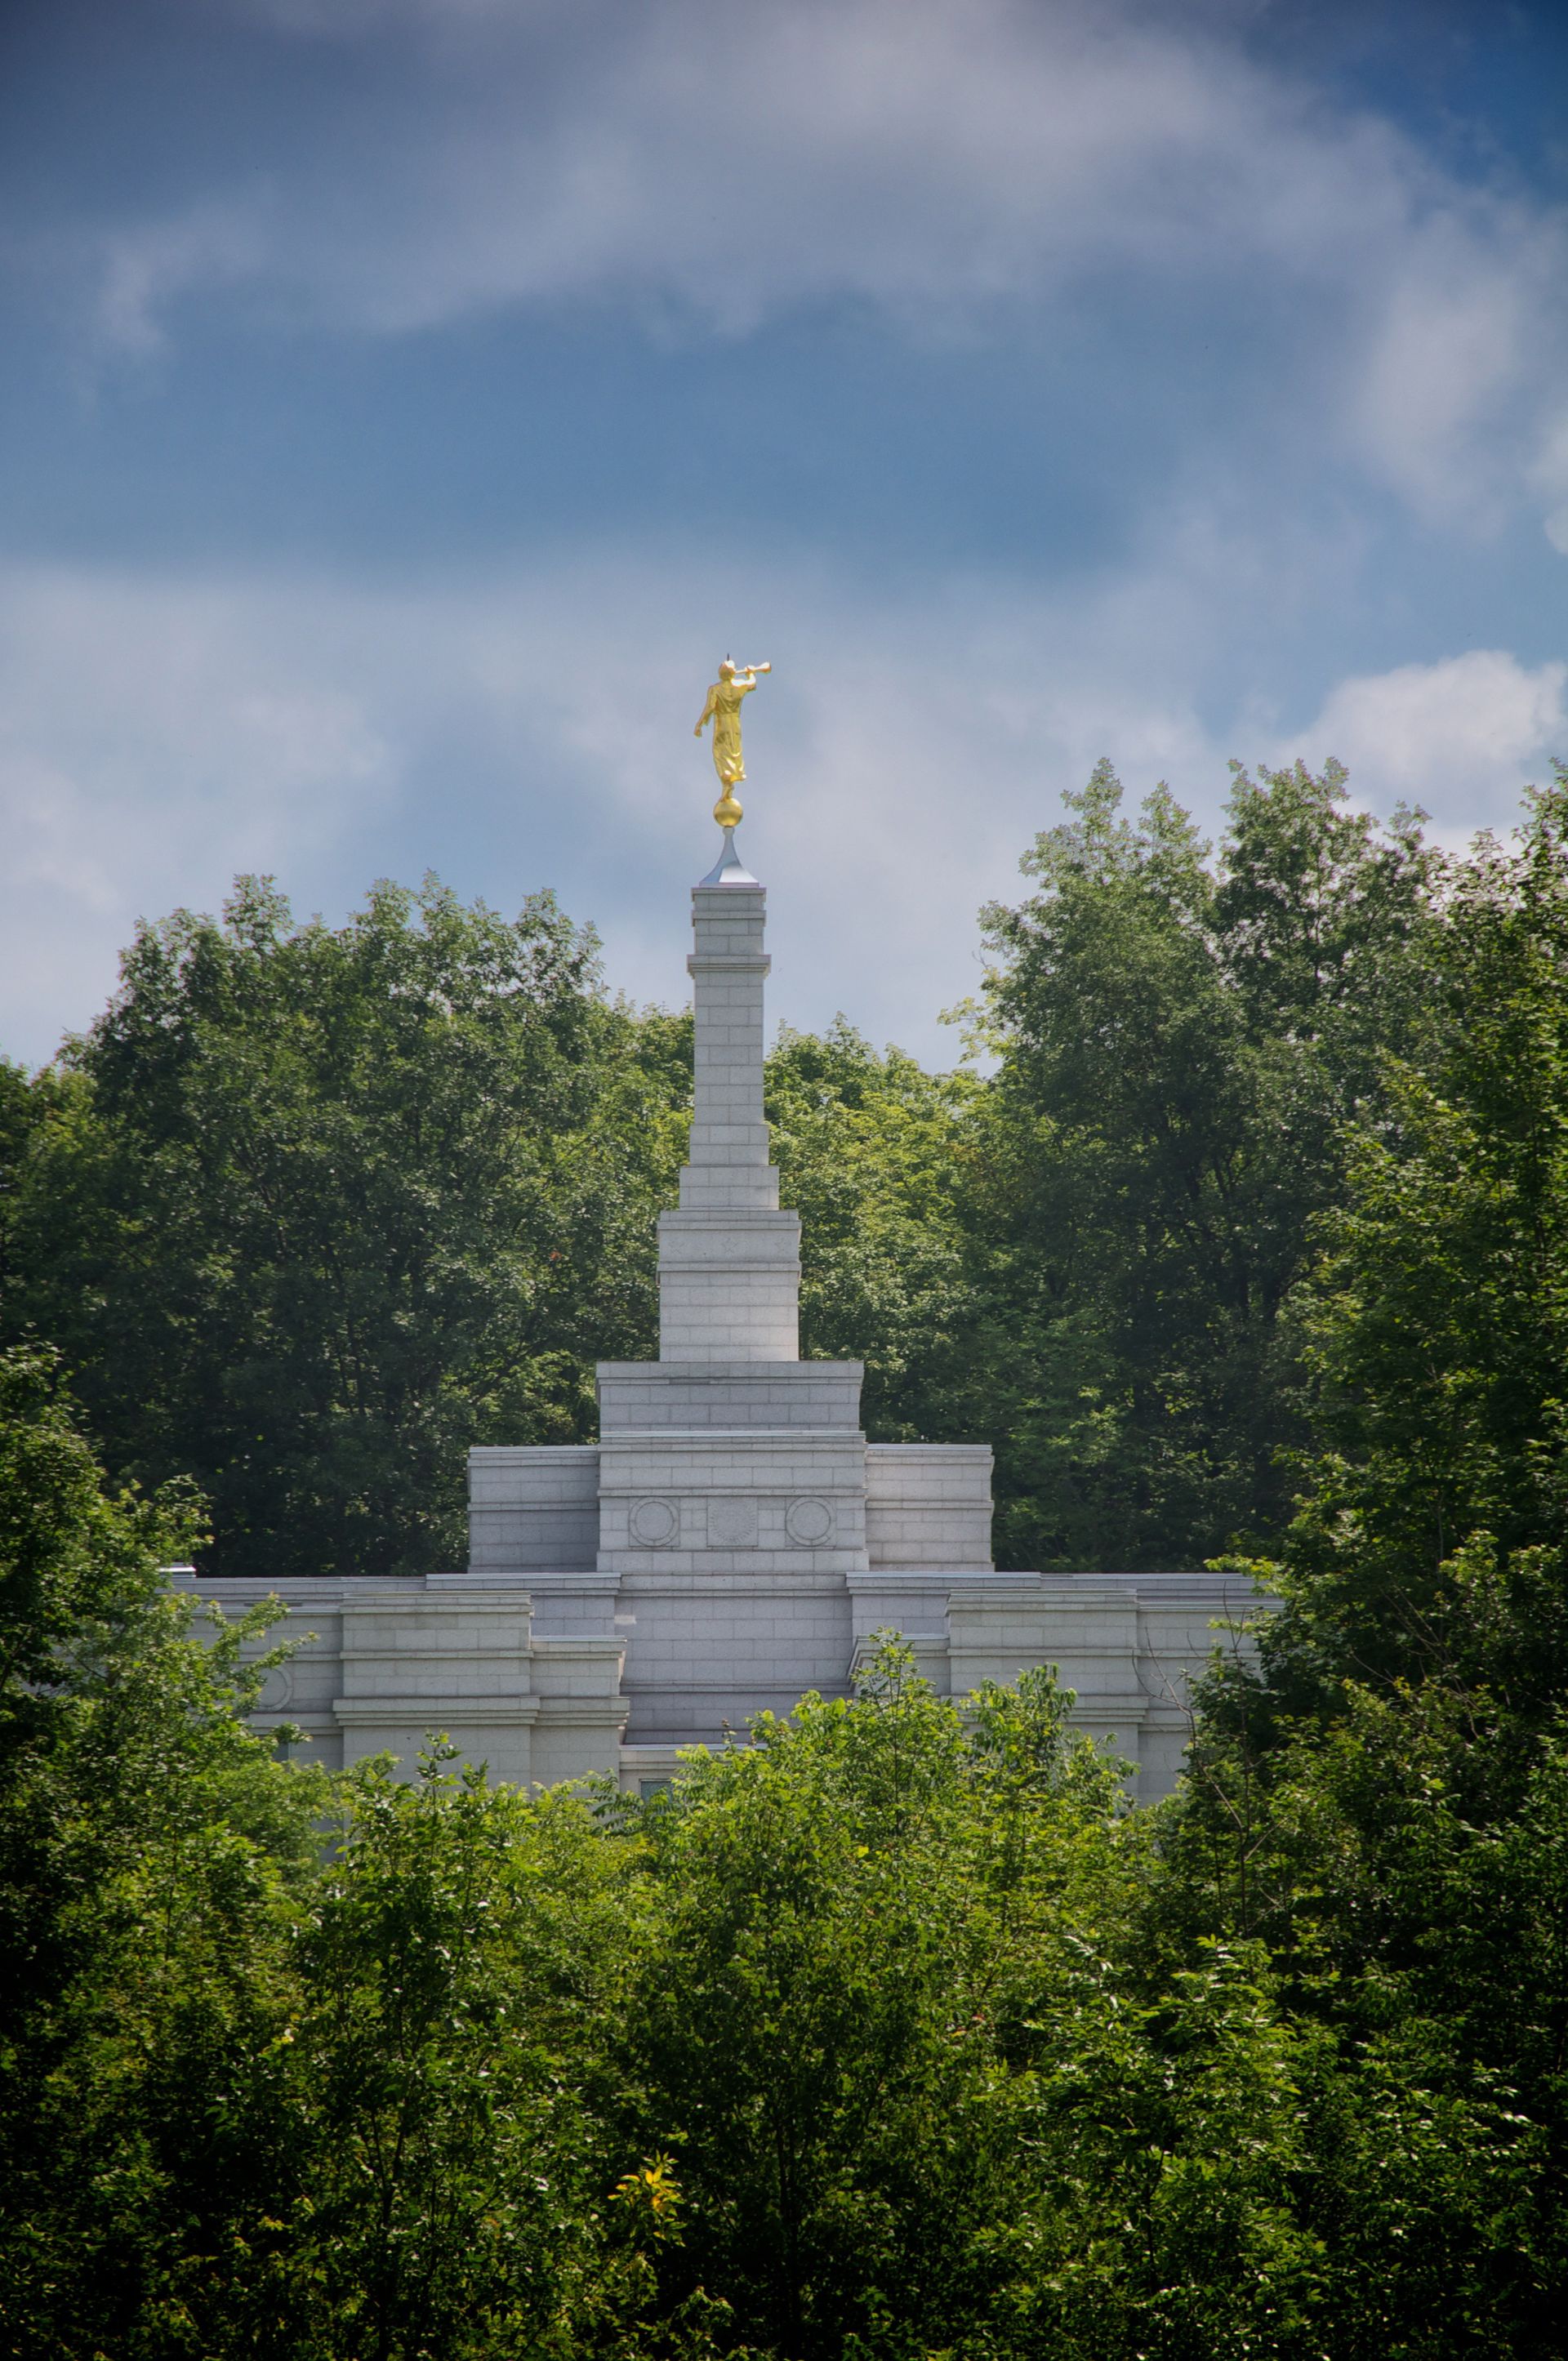 The Palmyra New York Temple spire, including scenery and the exterior of the temple.